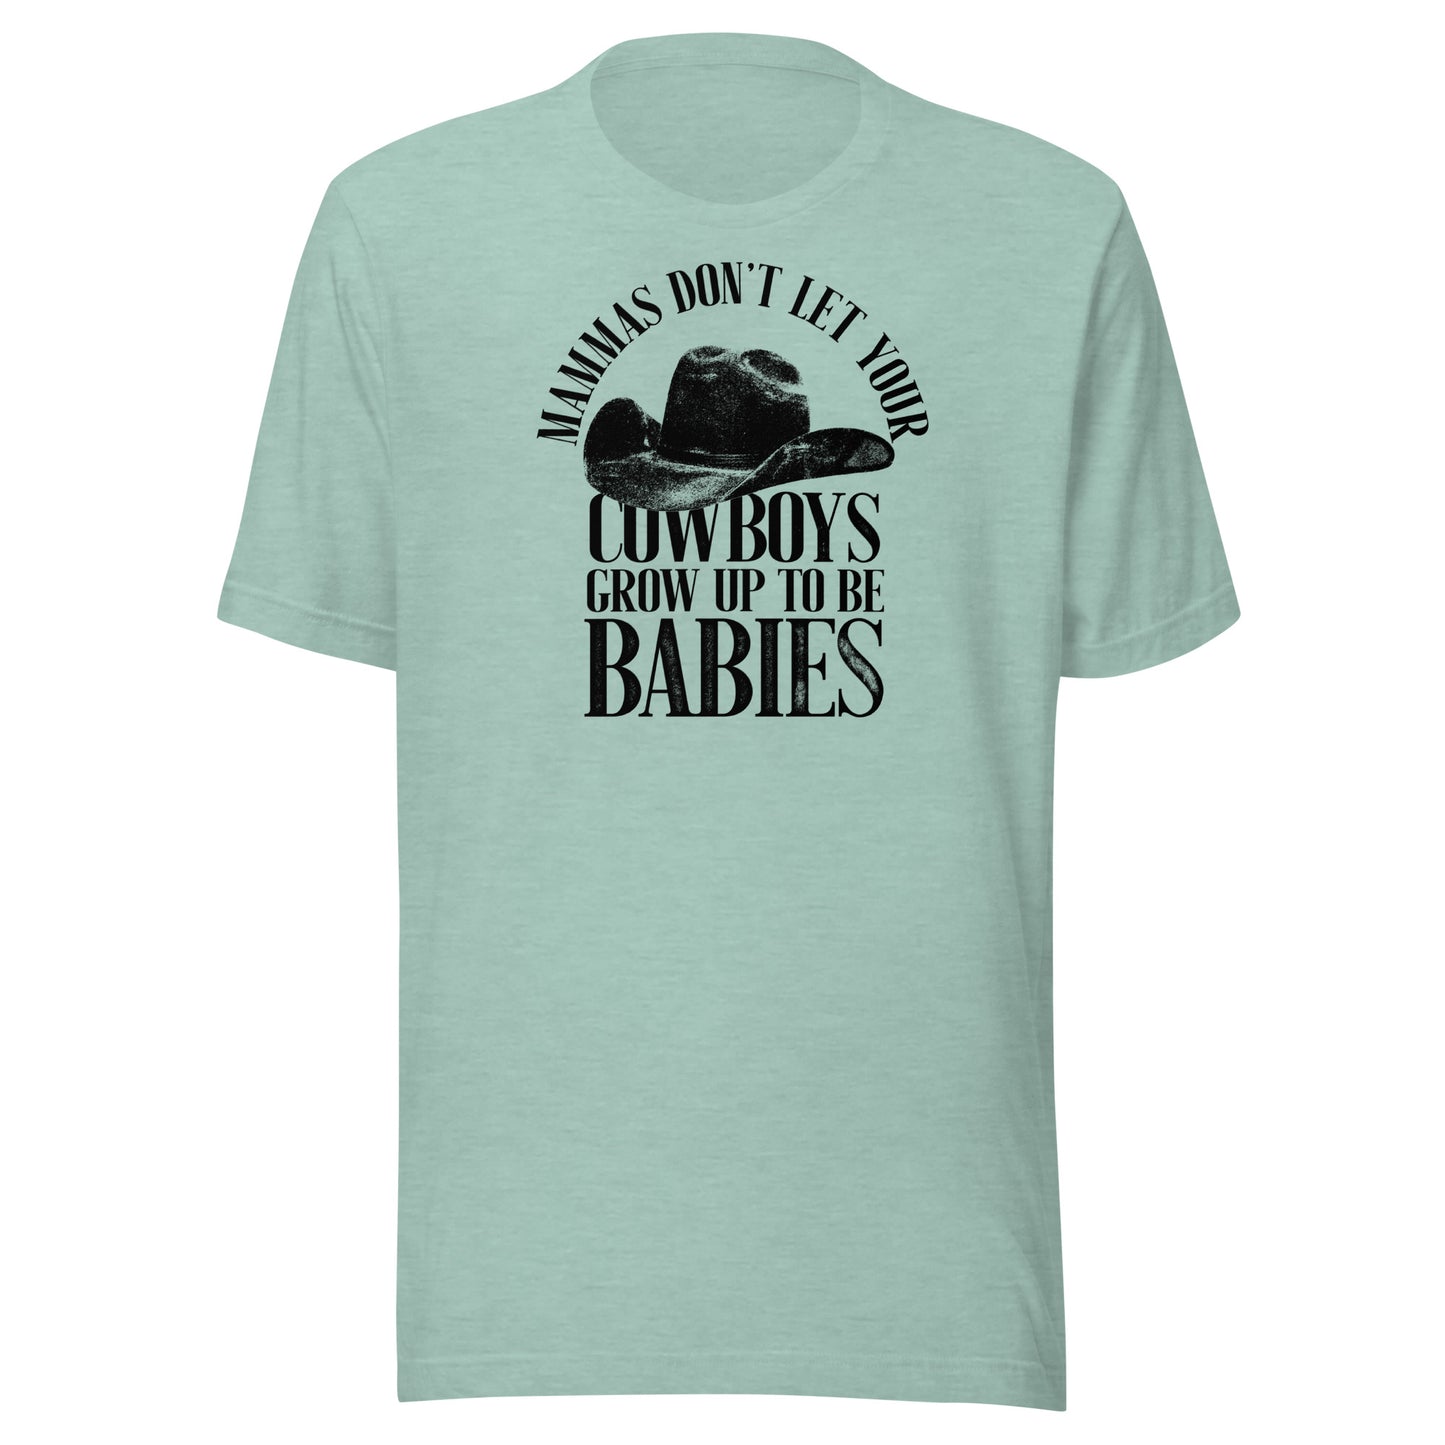 T-Shirt - Don't Let Your Cowboys Grow Up To Be Babies